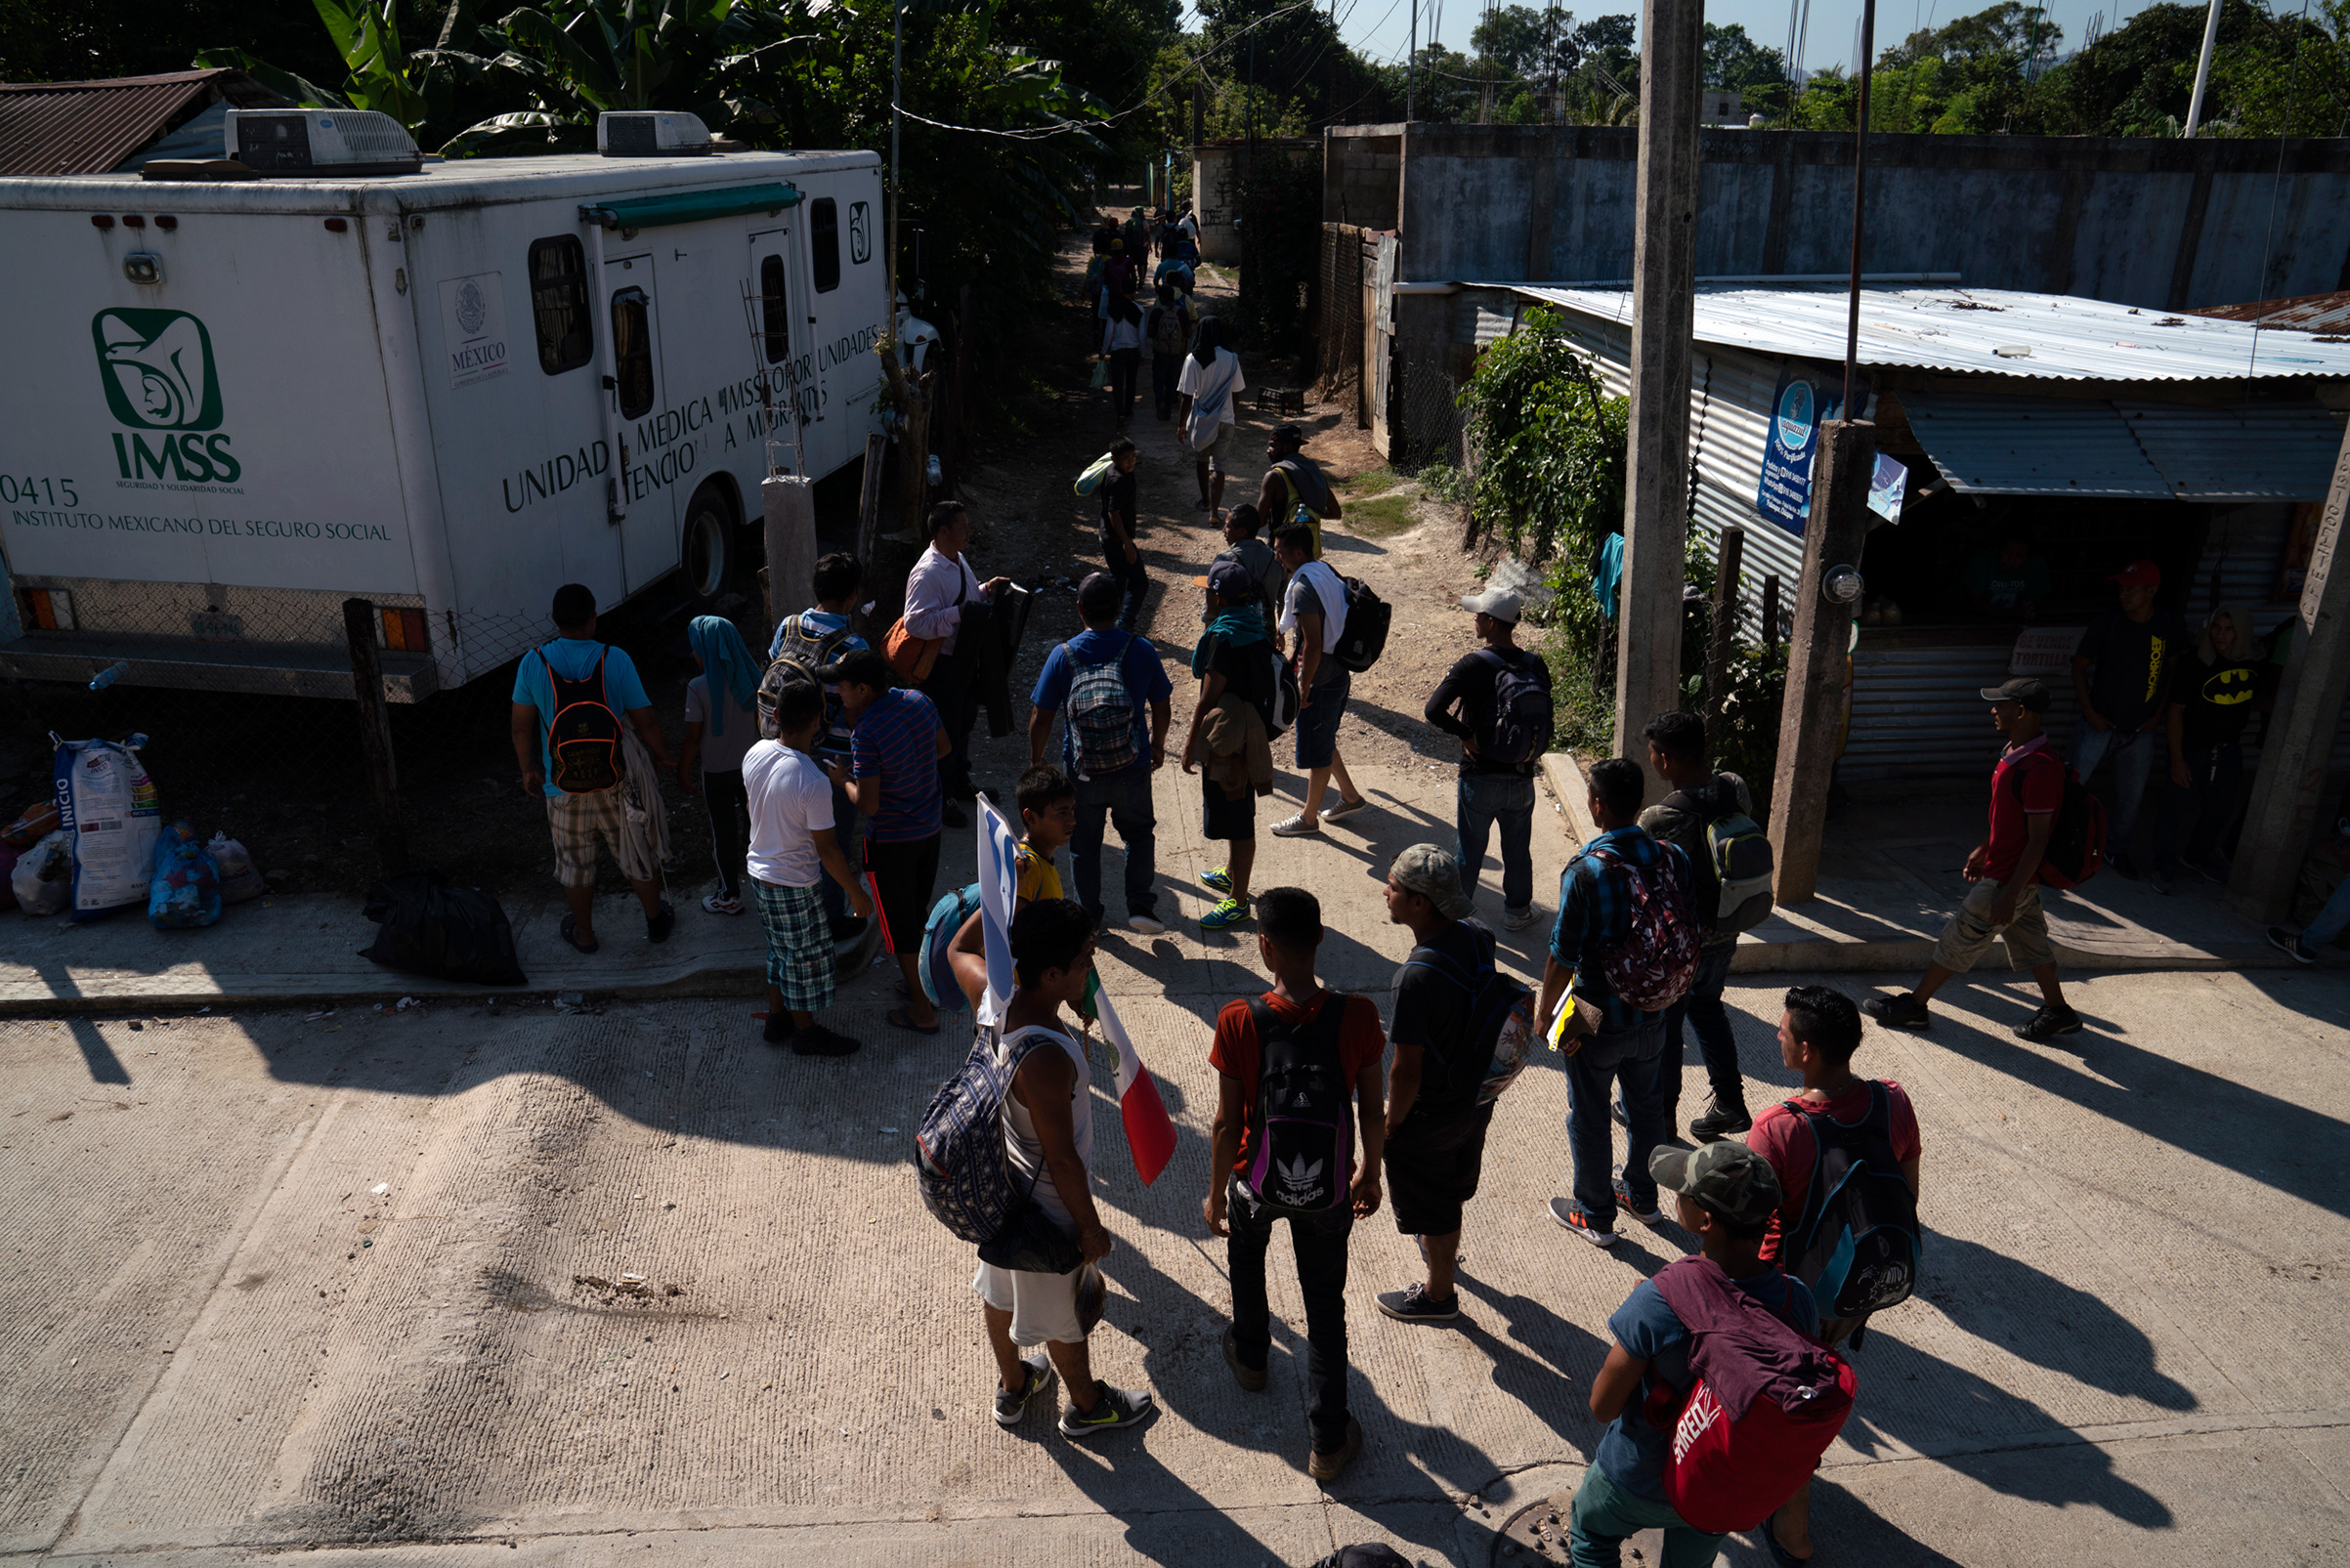 More than 50 migrants, 49 Honduran and one Guatemalan, walk to the nearest train station near Palenque, Chiapas, on Oct. 26. The group will be heading north by traveling on freight trains through México. They decided to travel as a group to be better protected from thieves, police, and Mexican immigration officers. (Veronica G. Cardenas for TIME)